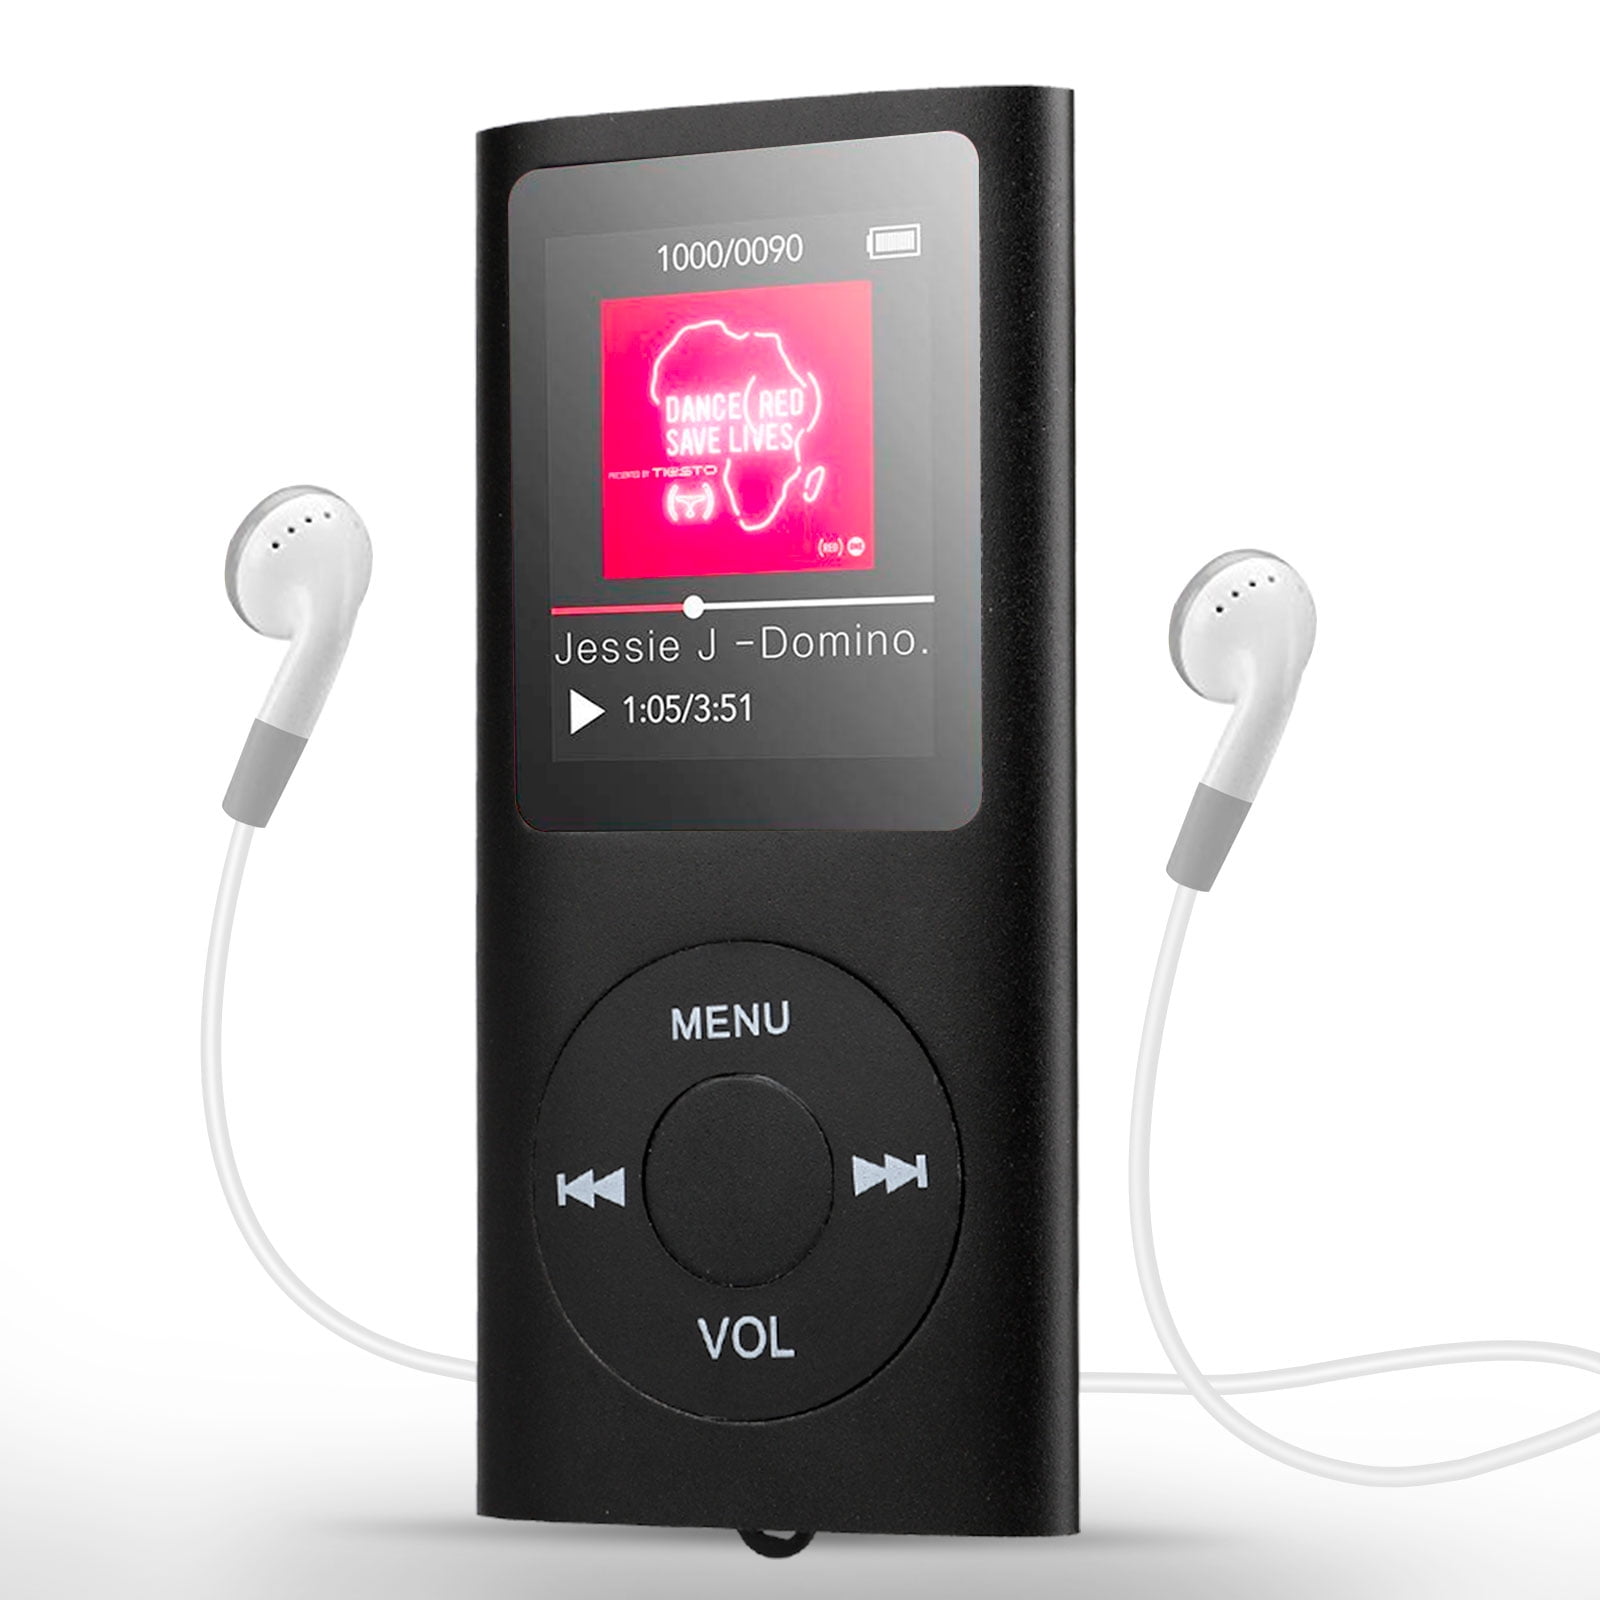 16GB MP3 Player with Bluetooth, AGPTEK Lossless Music 